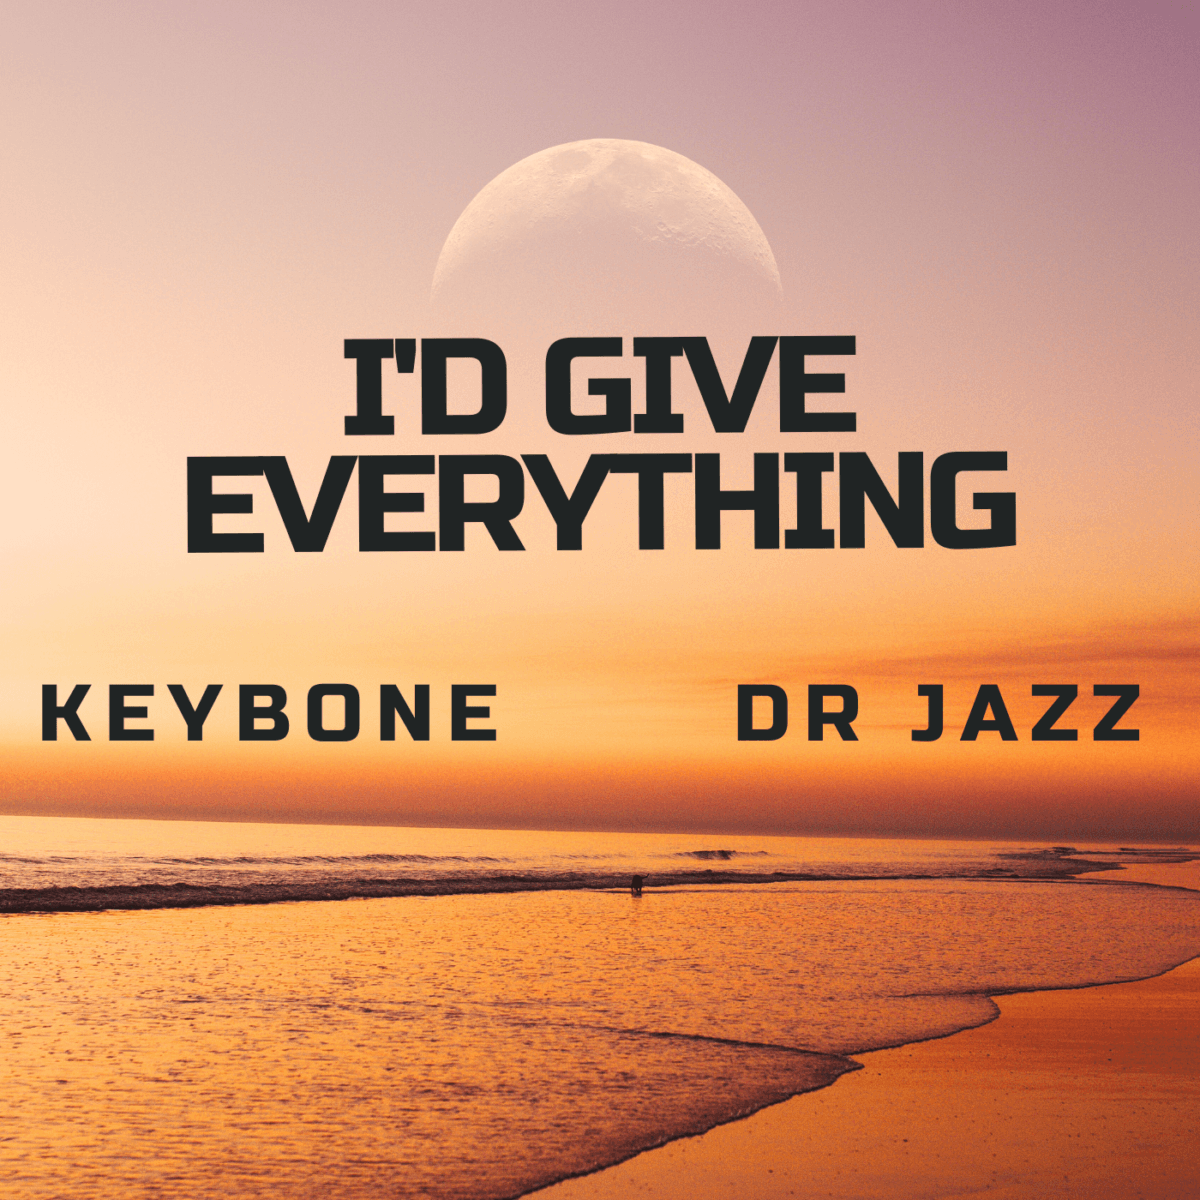 Keybone - I'd Give Everything